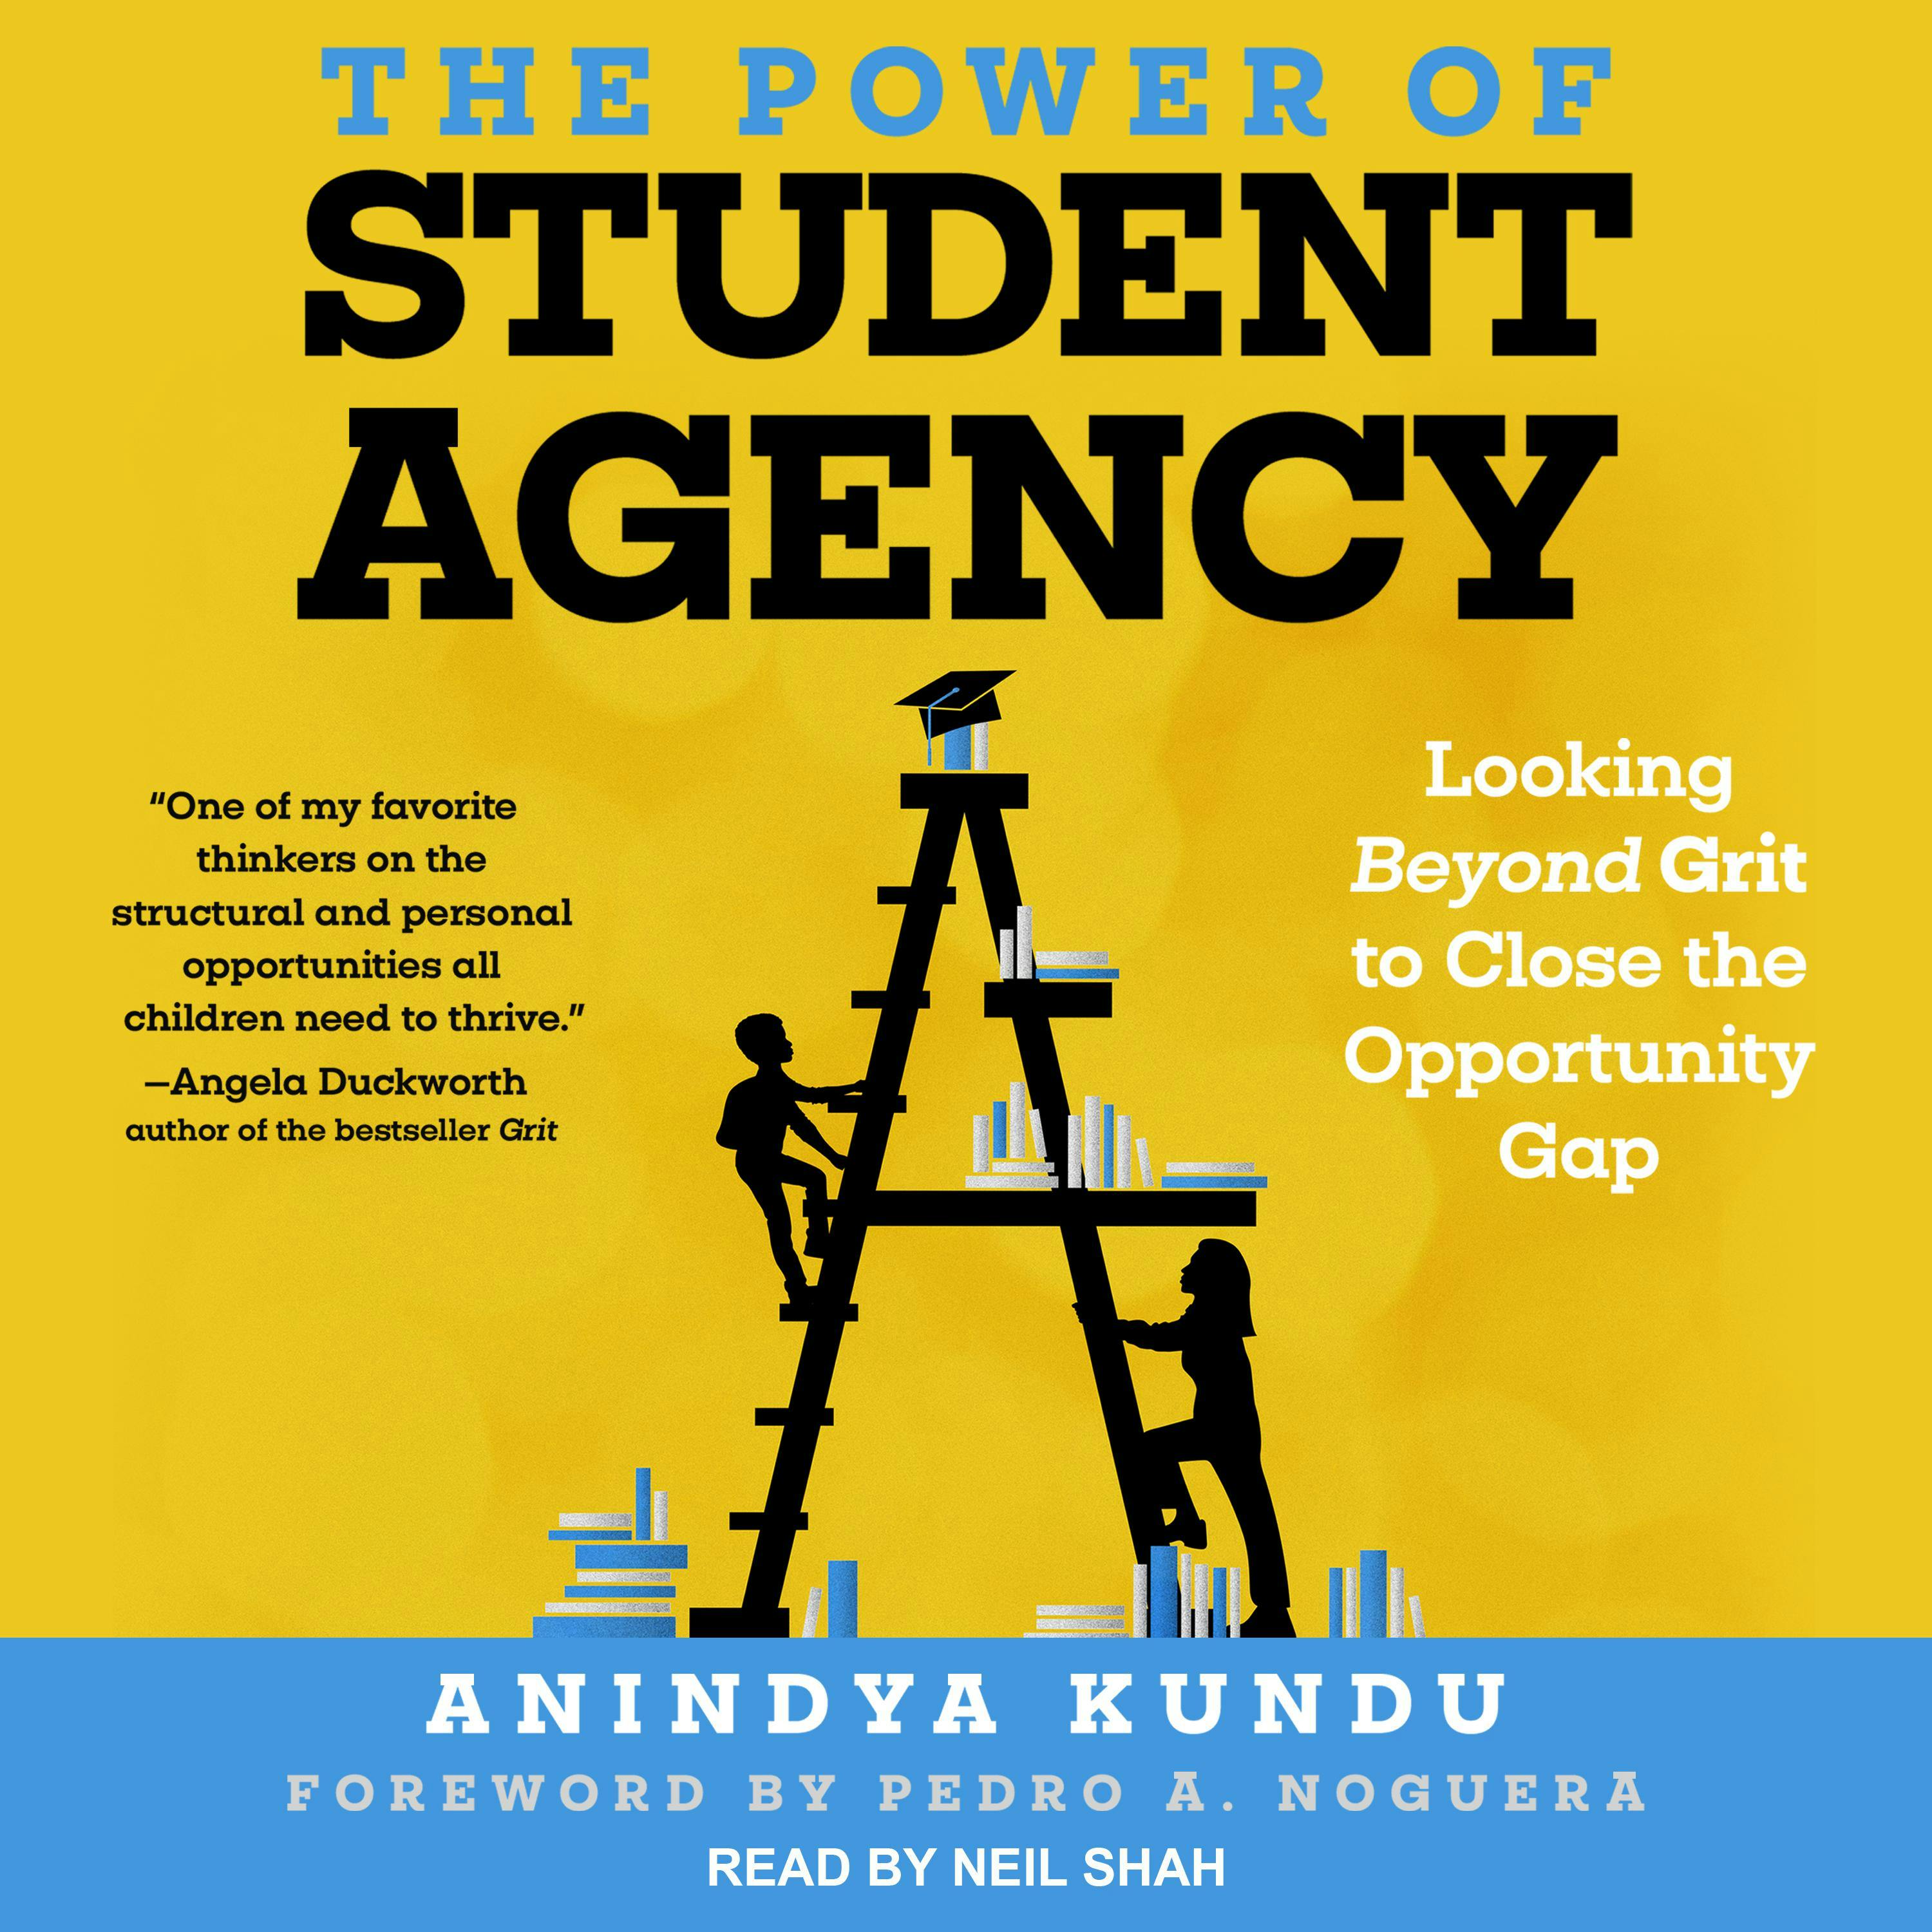 The Power of Student Agency: Looking Beyond Grit to Close the Opportunity Gap - Anindya Kundu, Pedro A. Noguera